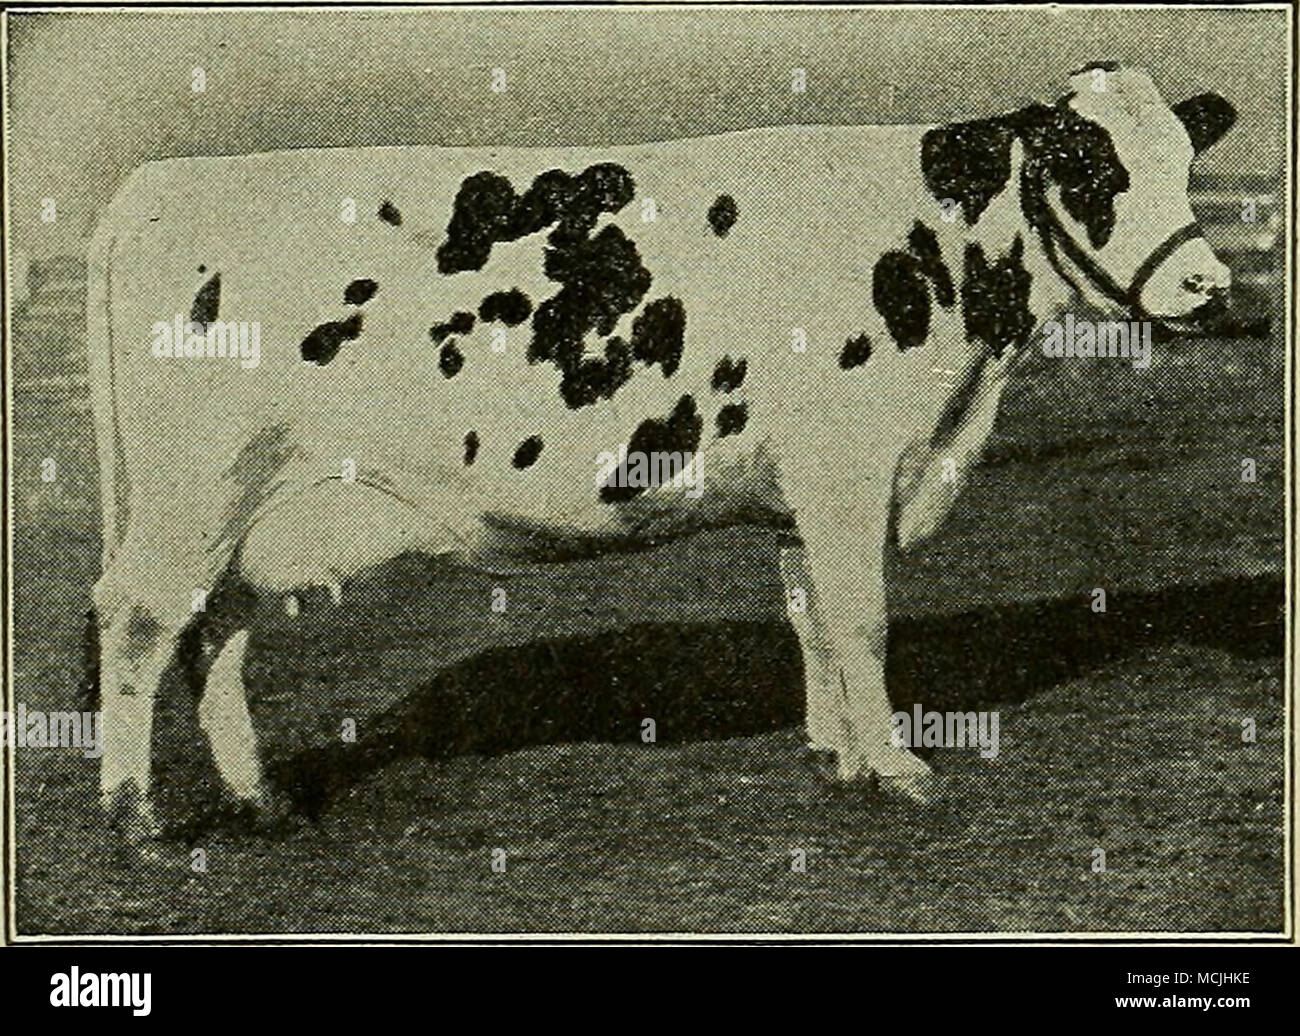 . FaiQine Wayne Third. This cow presented by Senator Isaac Stephenson, of Wisconsin, to President Taft. Dr. David Roberts, Waukesha. Wis. Kenosha, Wis., Feb. 24. 1911. Dear Doctor:—I am sending you a photograph of Pauline Wayne 3d, the pure bred Holstein cow that U. S. Senator Isaac Stephenson presented to W. H. Taft, President of the United States, last December. This cow received your treatment for abortion with the balance of the herd and gave birth to a nice, strong, healthy calf in the White House Barn at Washington, a week after she arrived there. Believing that these facts will prove of Stock Photo